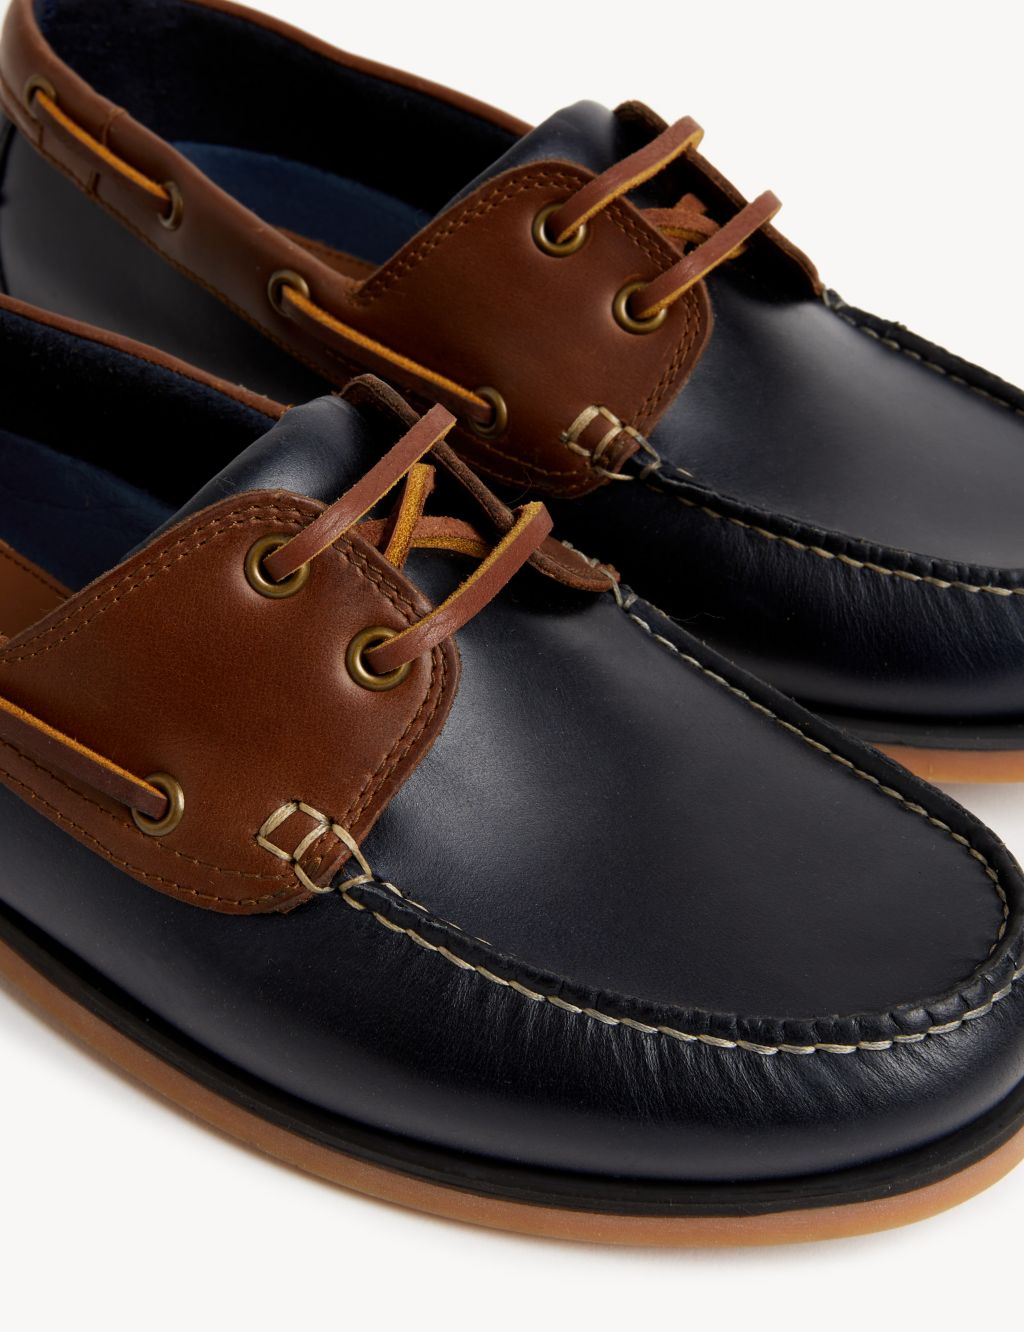 Wide Fit Leather Deck Shoes image 3